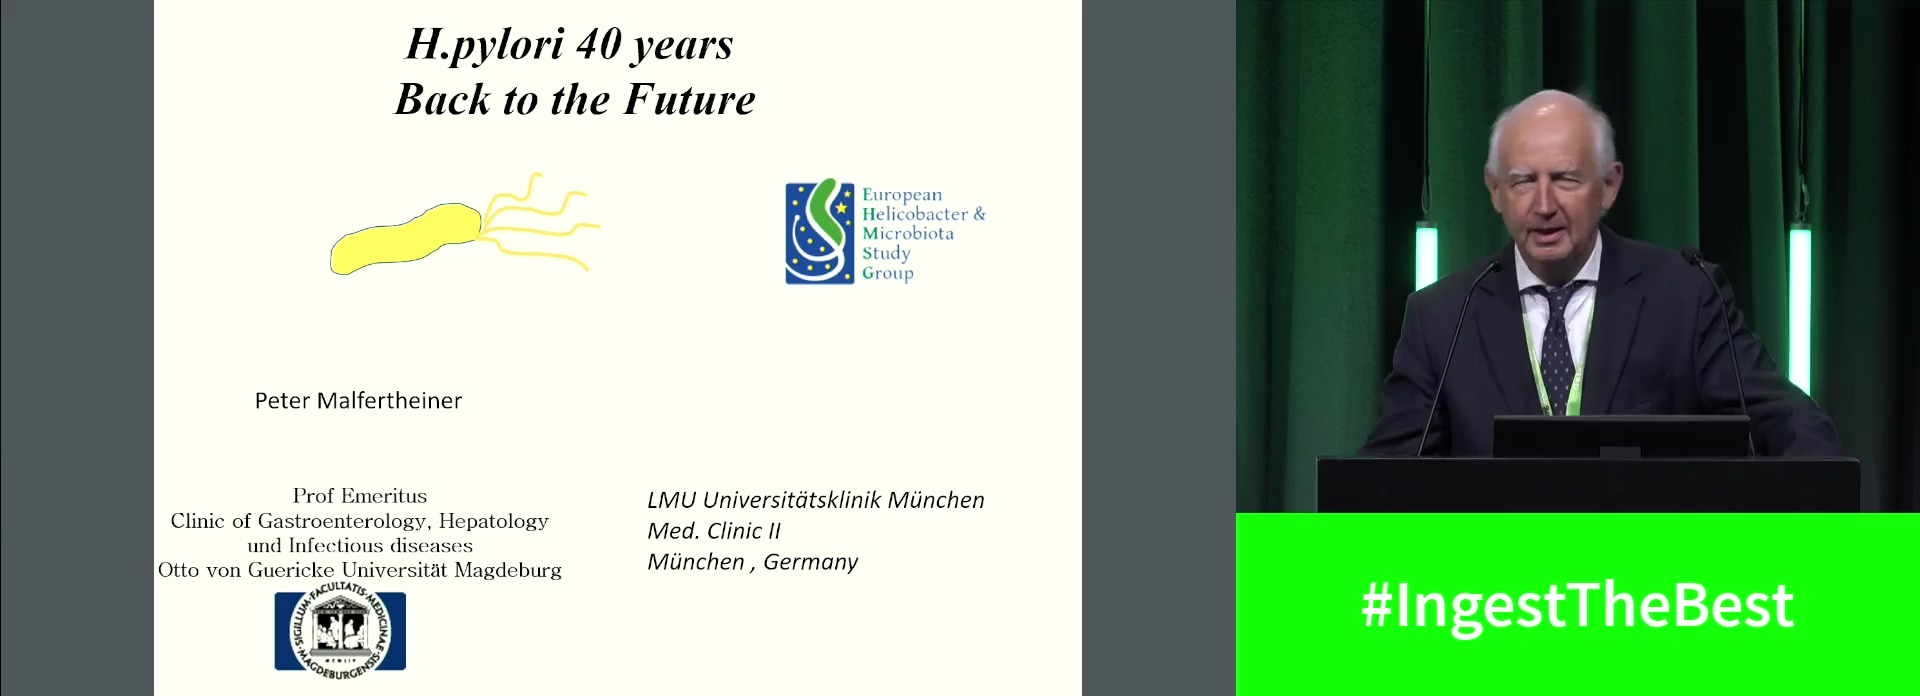 Introduction: 40 years of H. pylori : Back to the future